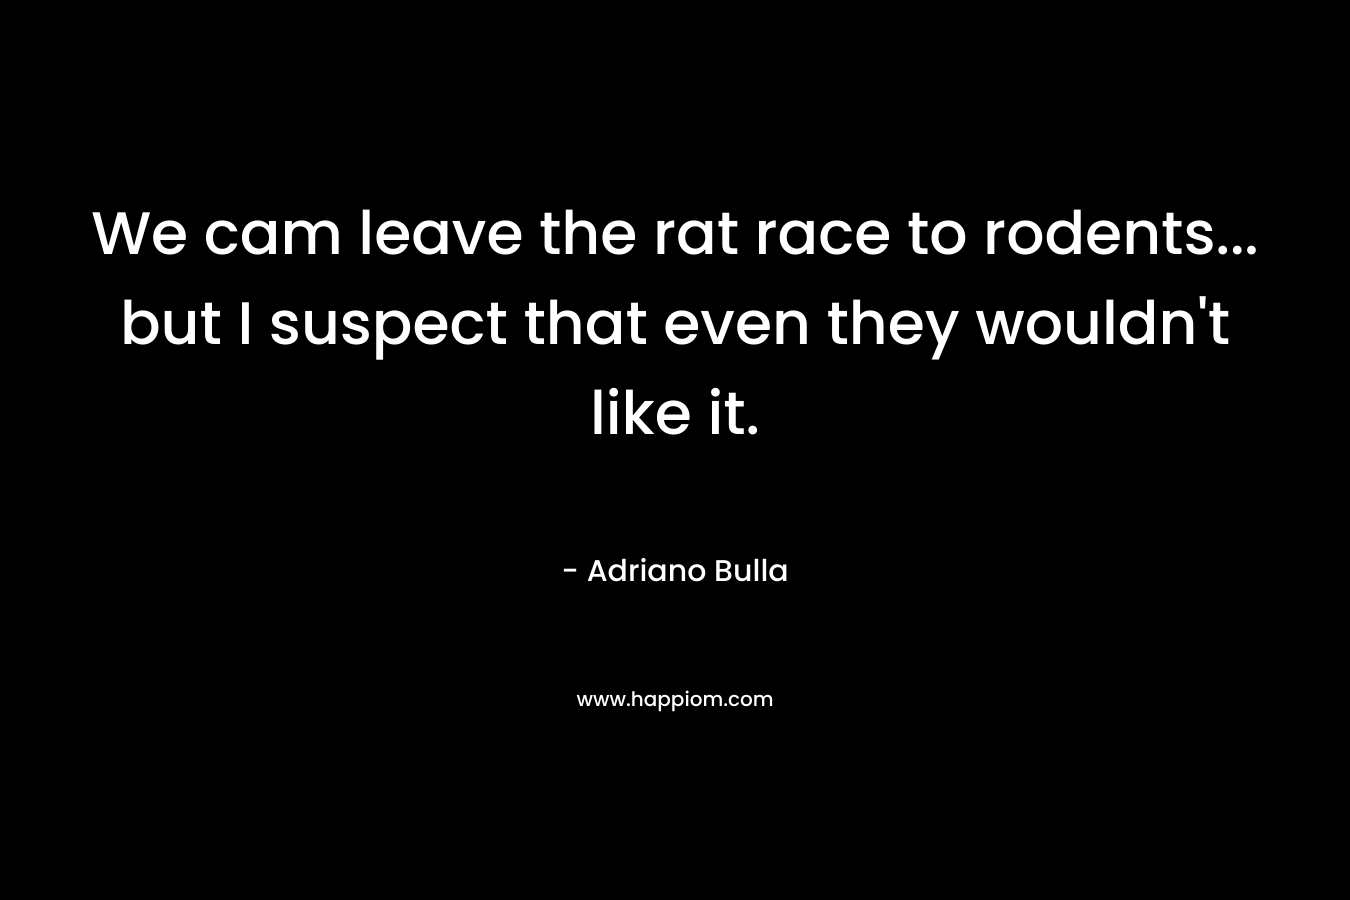 We cam leave the rat race to rodents... but I suspect that even they wouldn't like it.